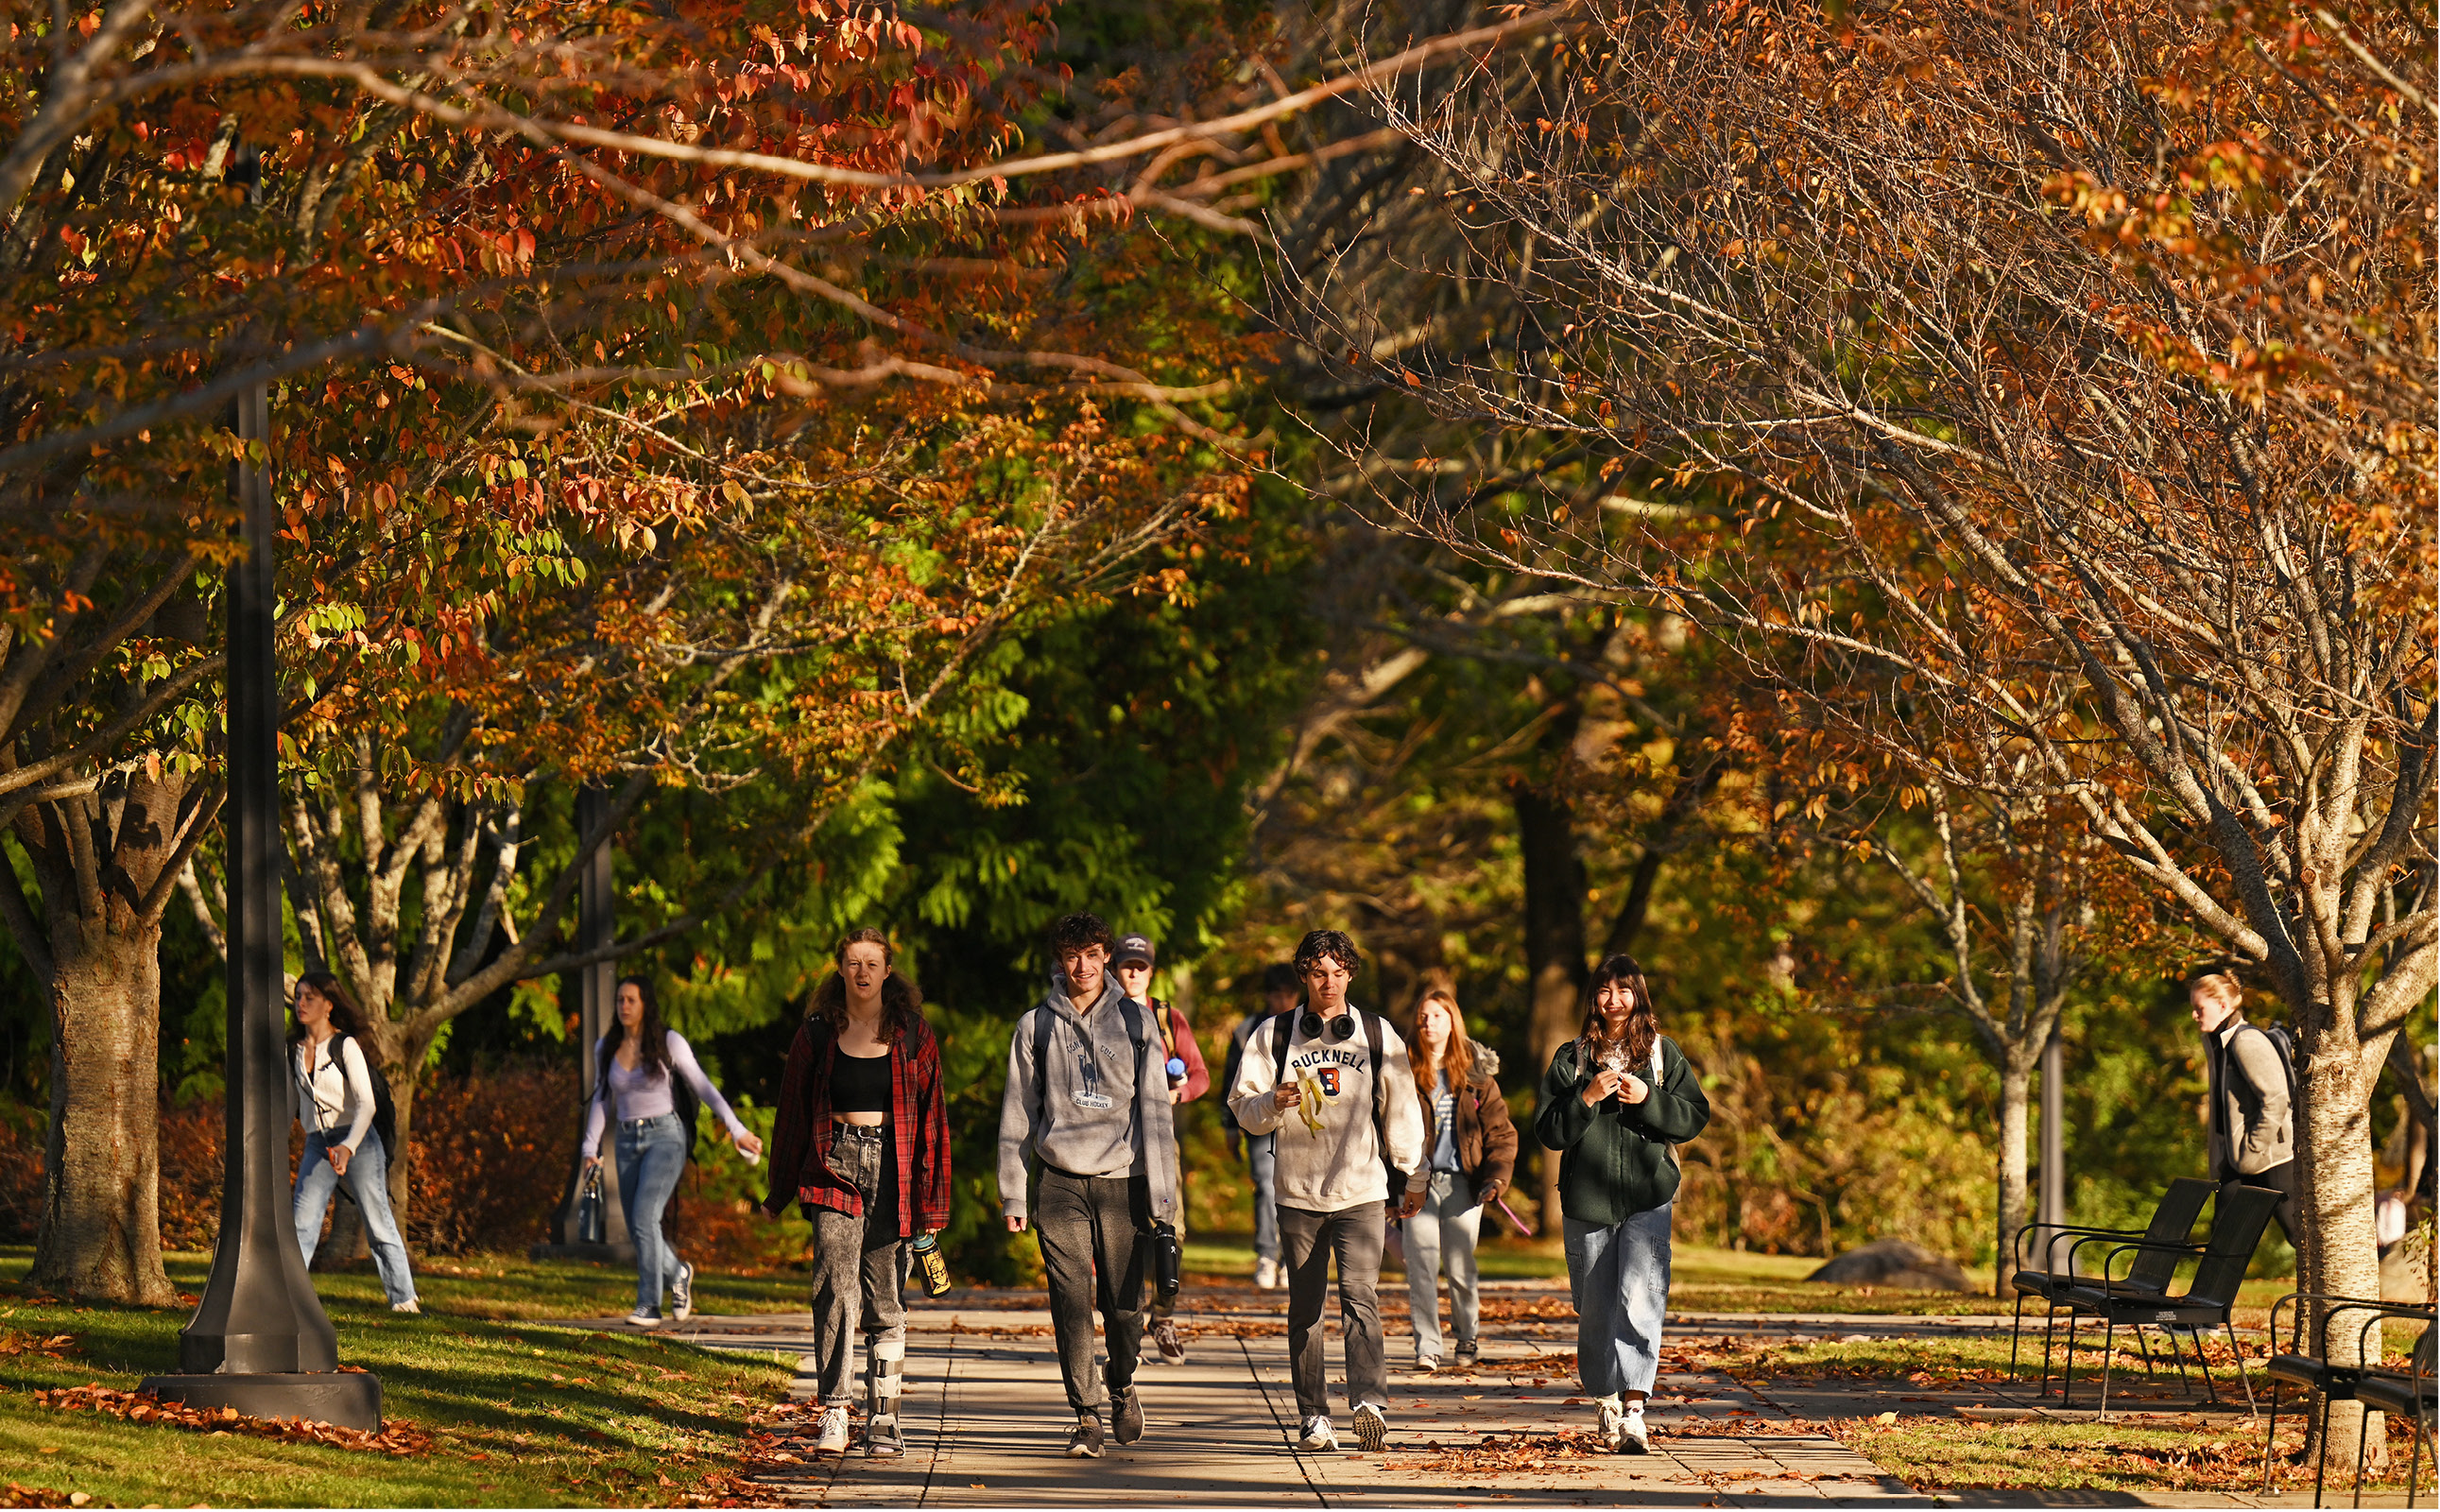 Students walking on campus in Fall.